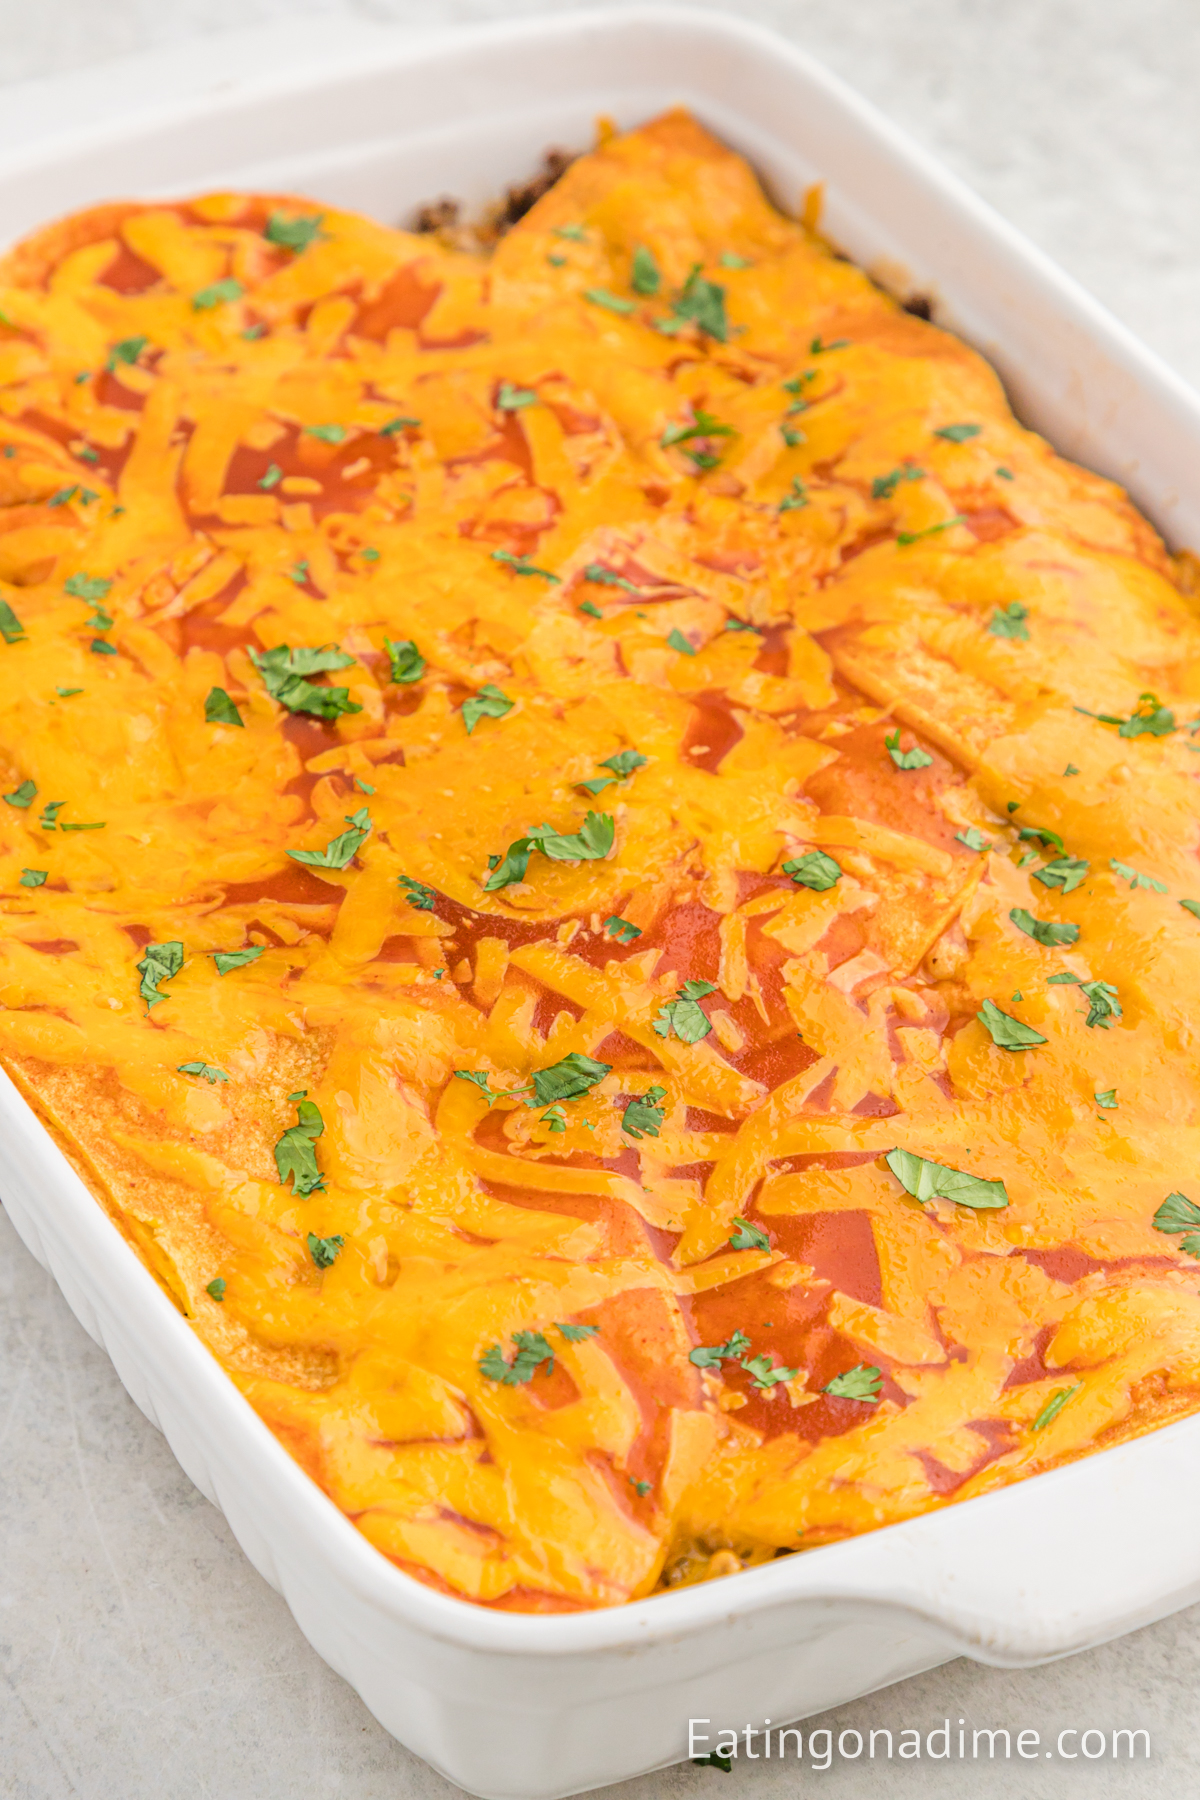 Close up image of beef enchilada casserole in a baking dish